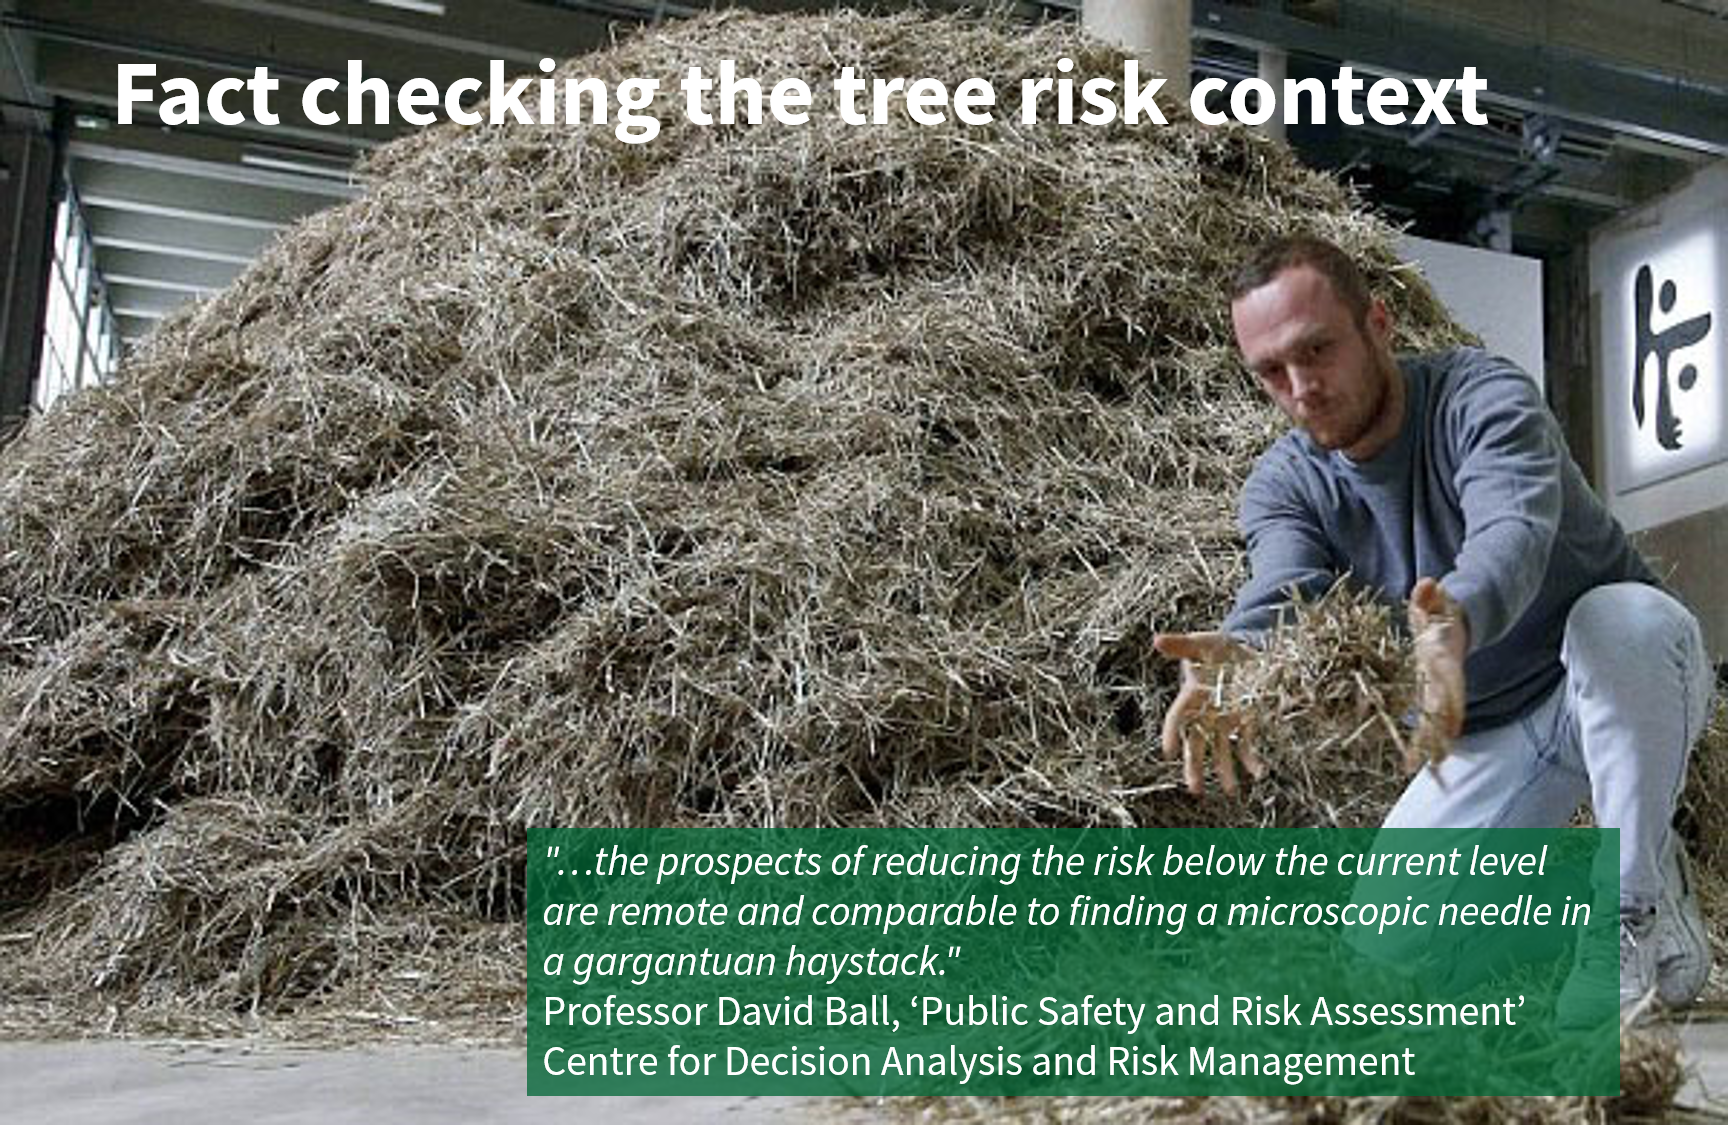 Tree risk management | Finding a microscopic need in a gargantuan haystack